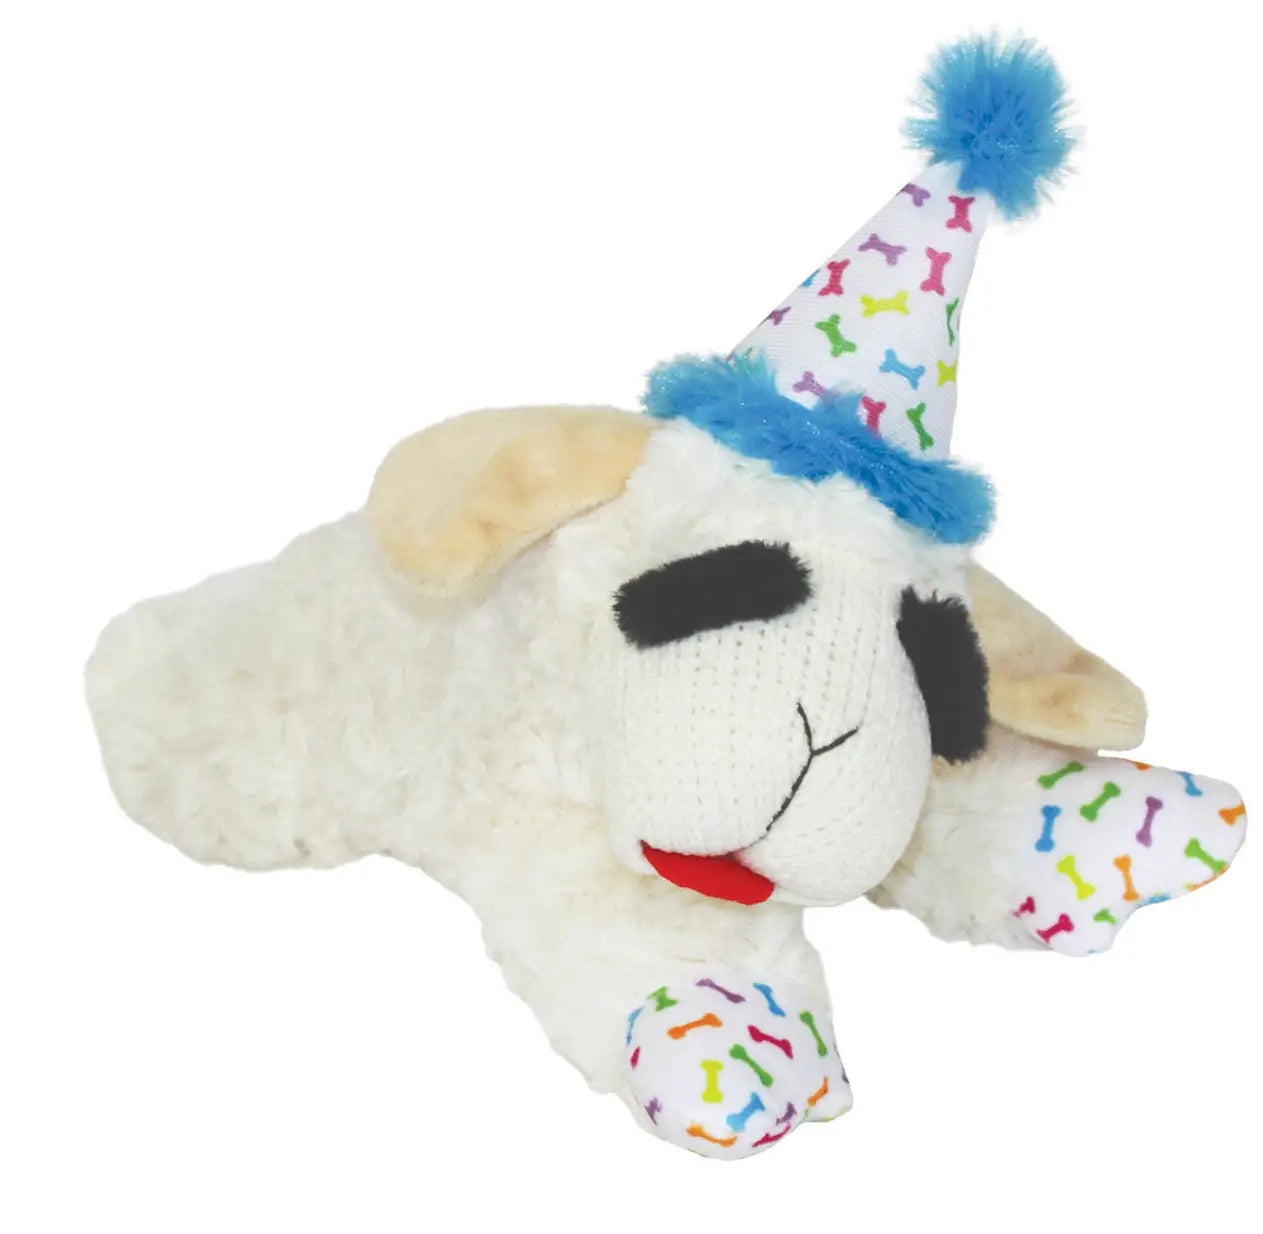 Isolated plush Lamb Chop toy wearing a white birthday party hat with a colorful bone pattern and blue ball on top